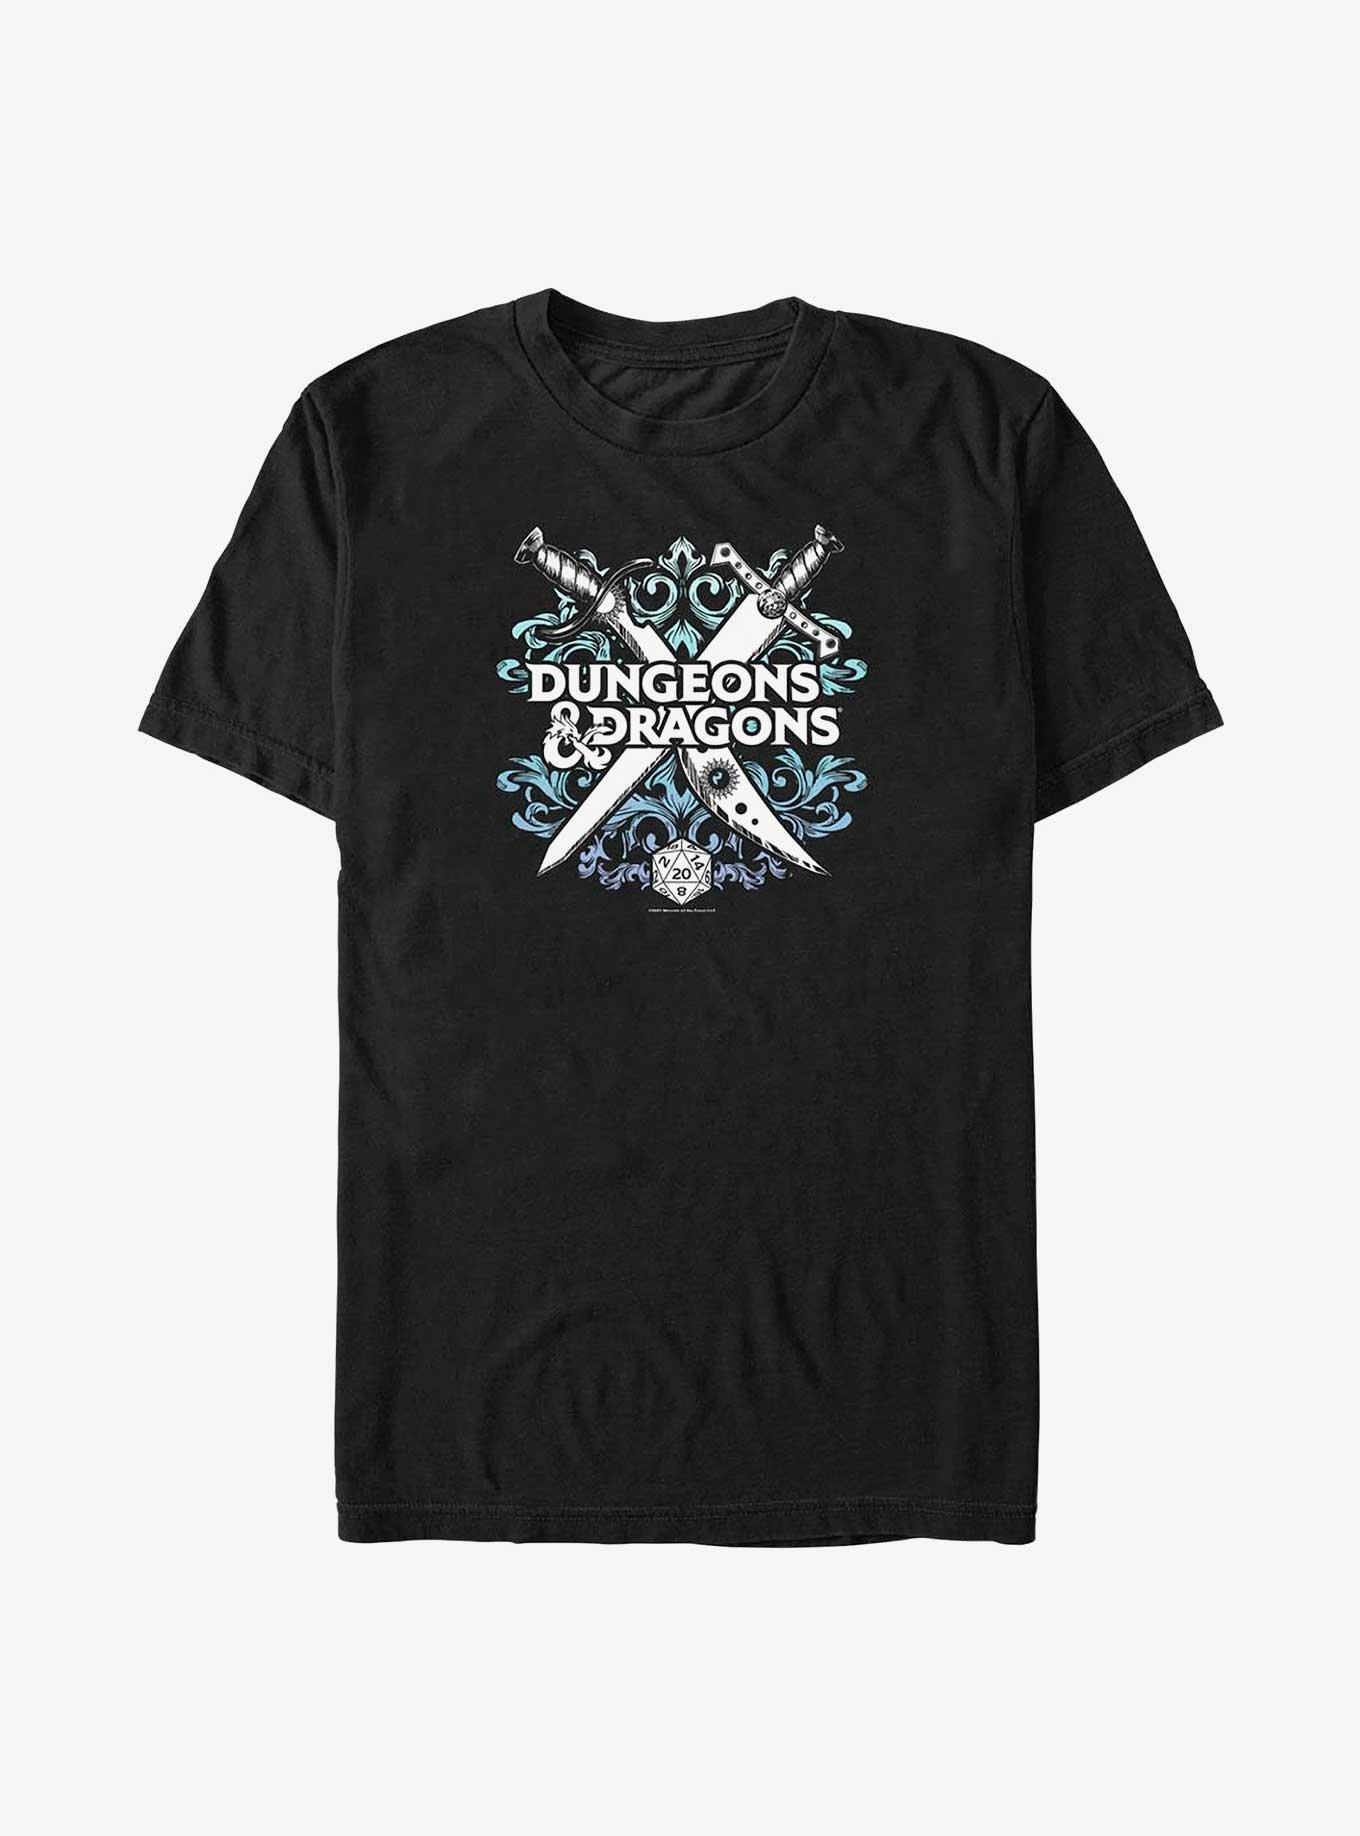 Dungeons & Dragons Decorative Crossed Weapons Big & Tall T-Shirt, BLACK, hi-res